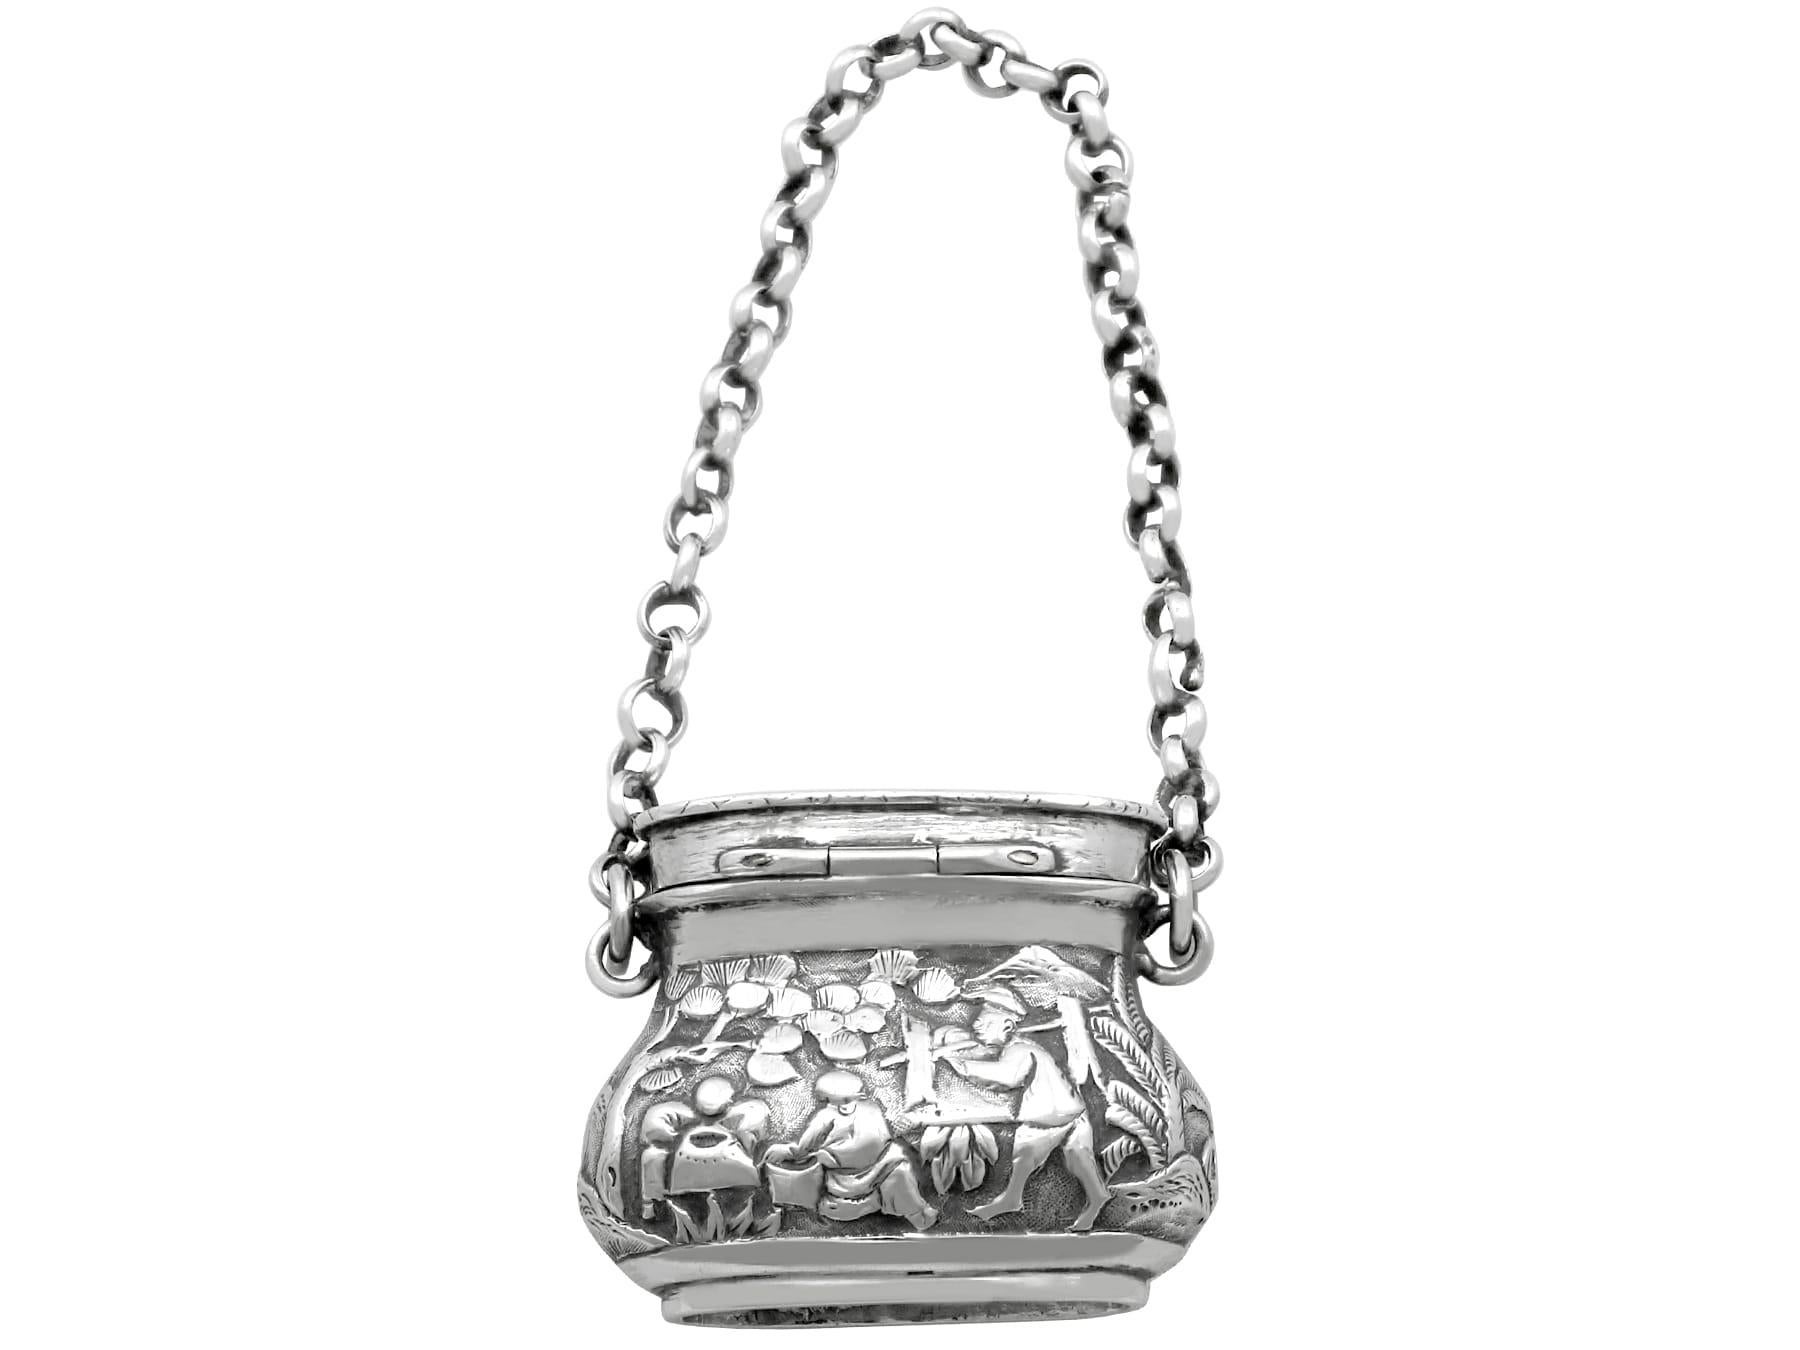 An exceptional, fine and impressive antique Chinese silver vinaigrette in the form of a purse; an addition to our silver boxes collection

This exceptional antique Chinese silver vinaigrette has been realistically modelled in the form of a